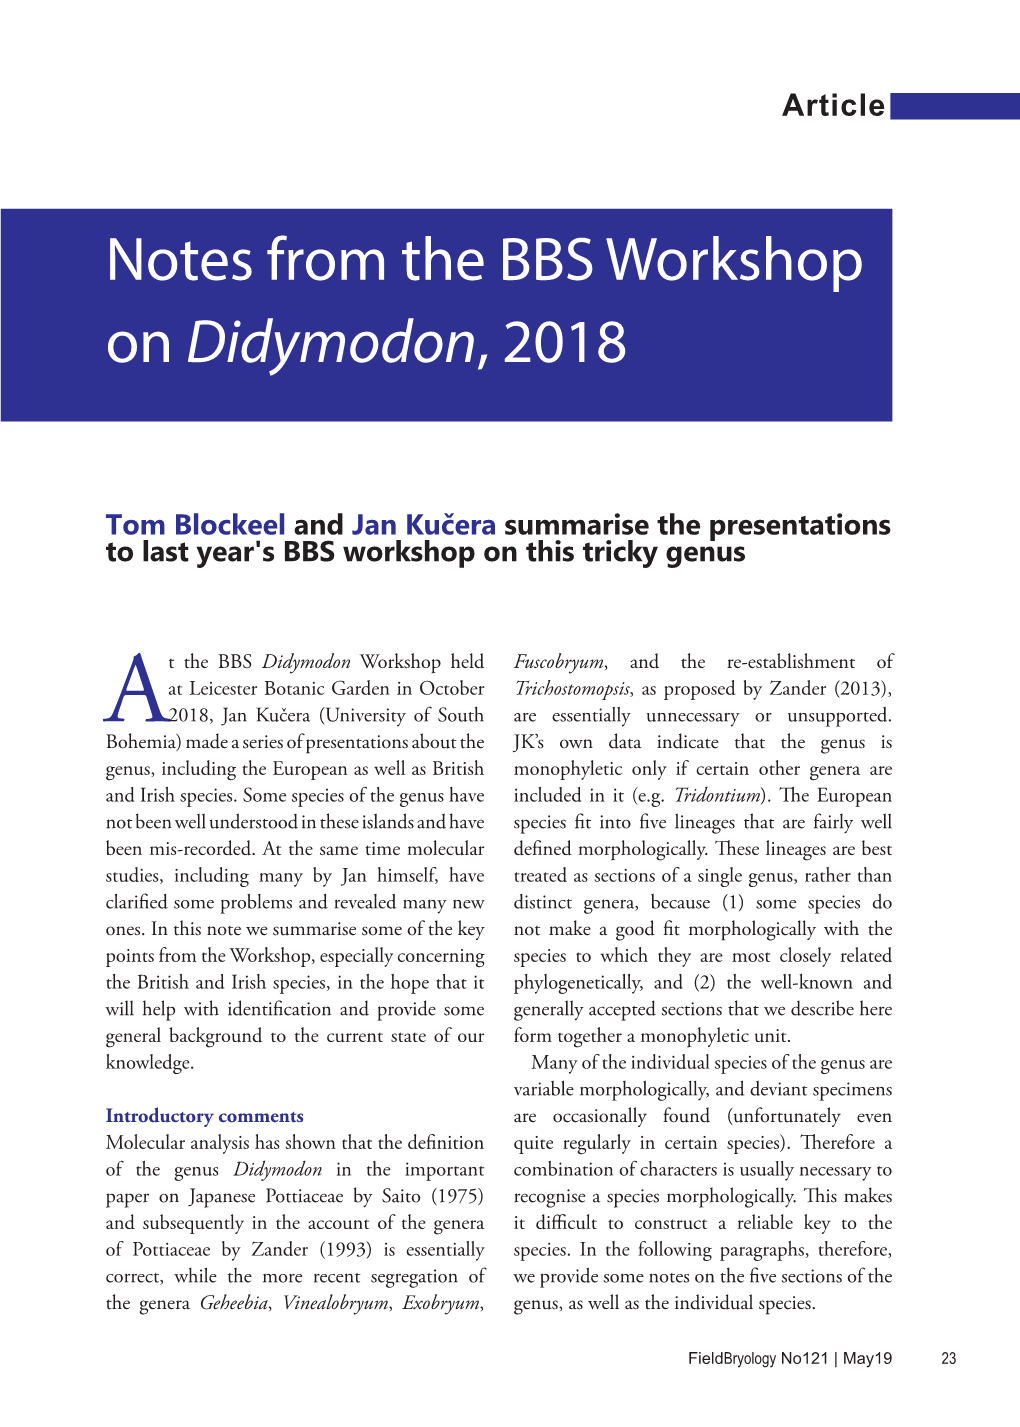 Notes from the BBS Workshop on Didymodon, 2018